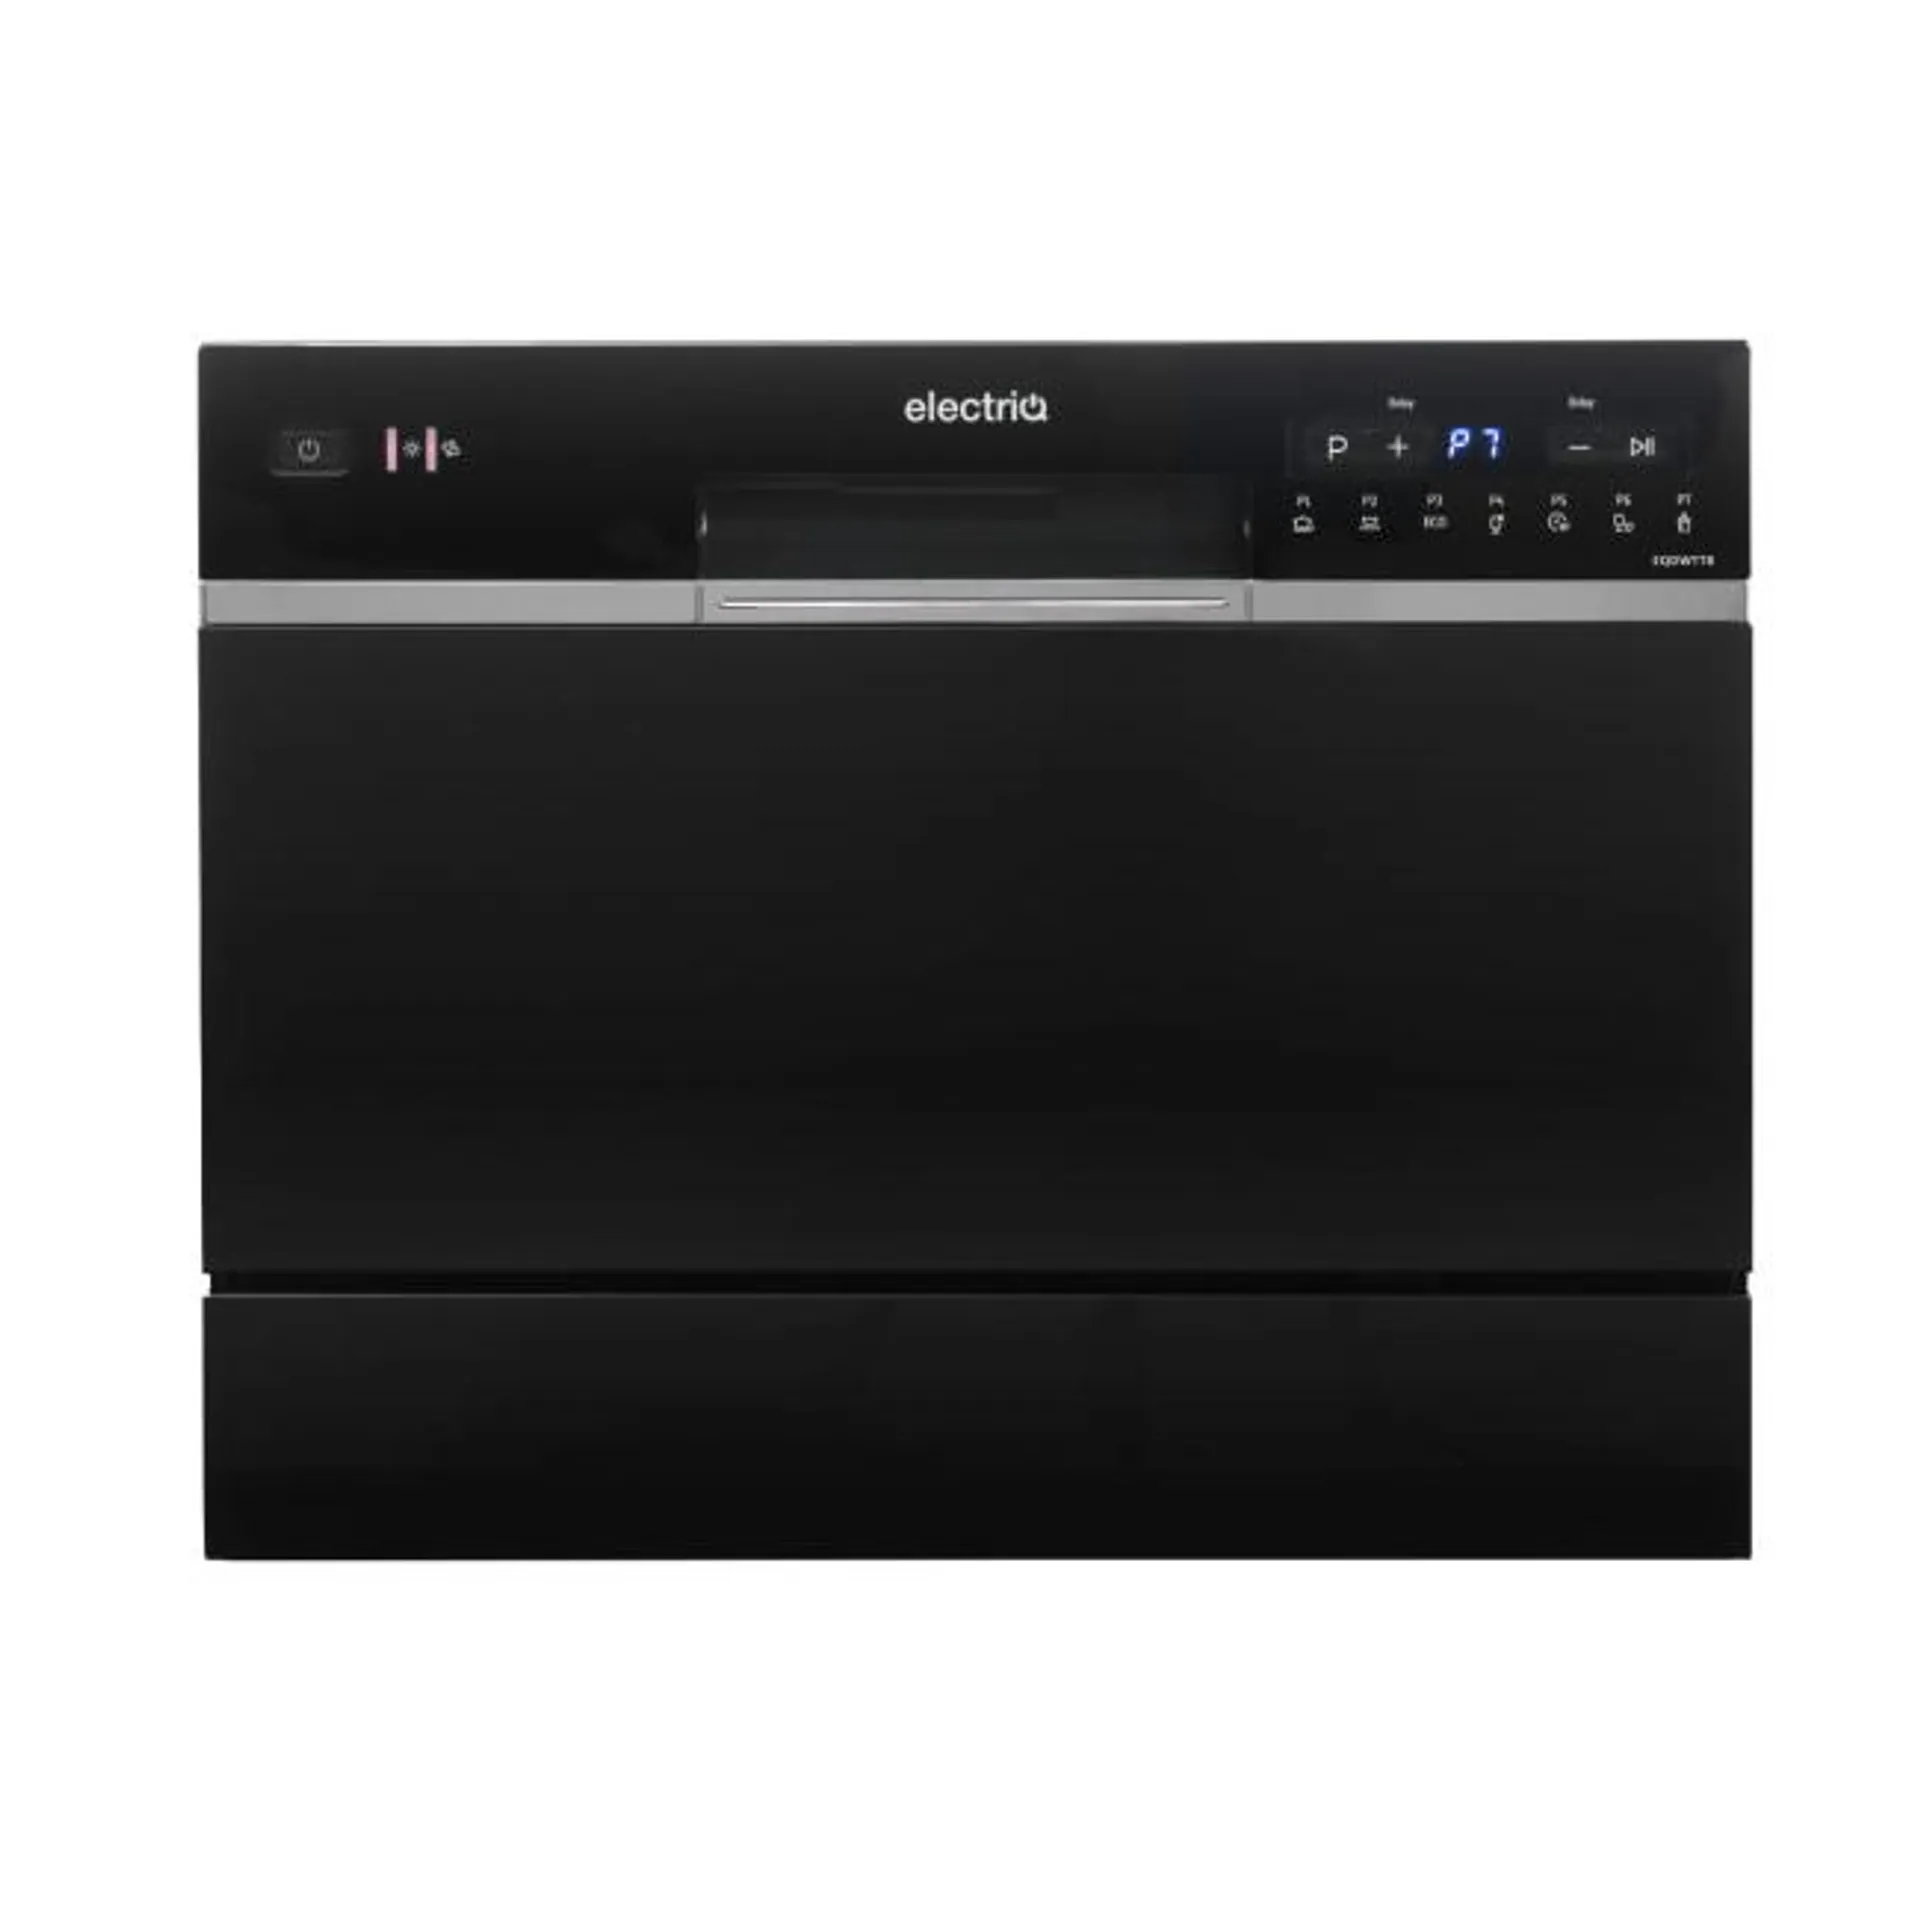 electriQ 6 Place Settings Table Top Integrated Dishwasher - Black